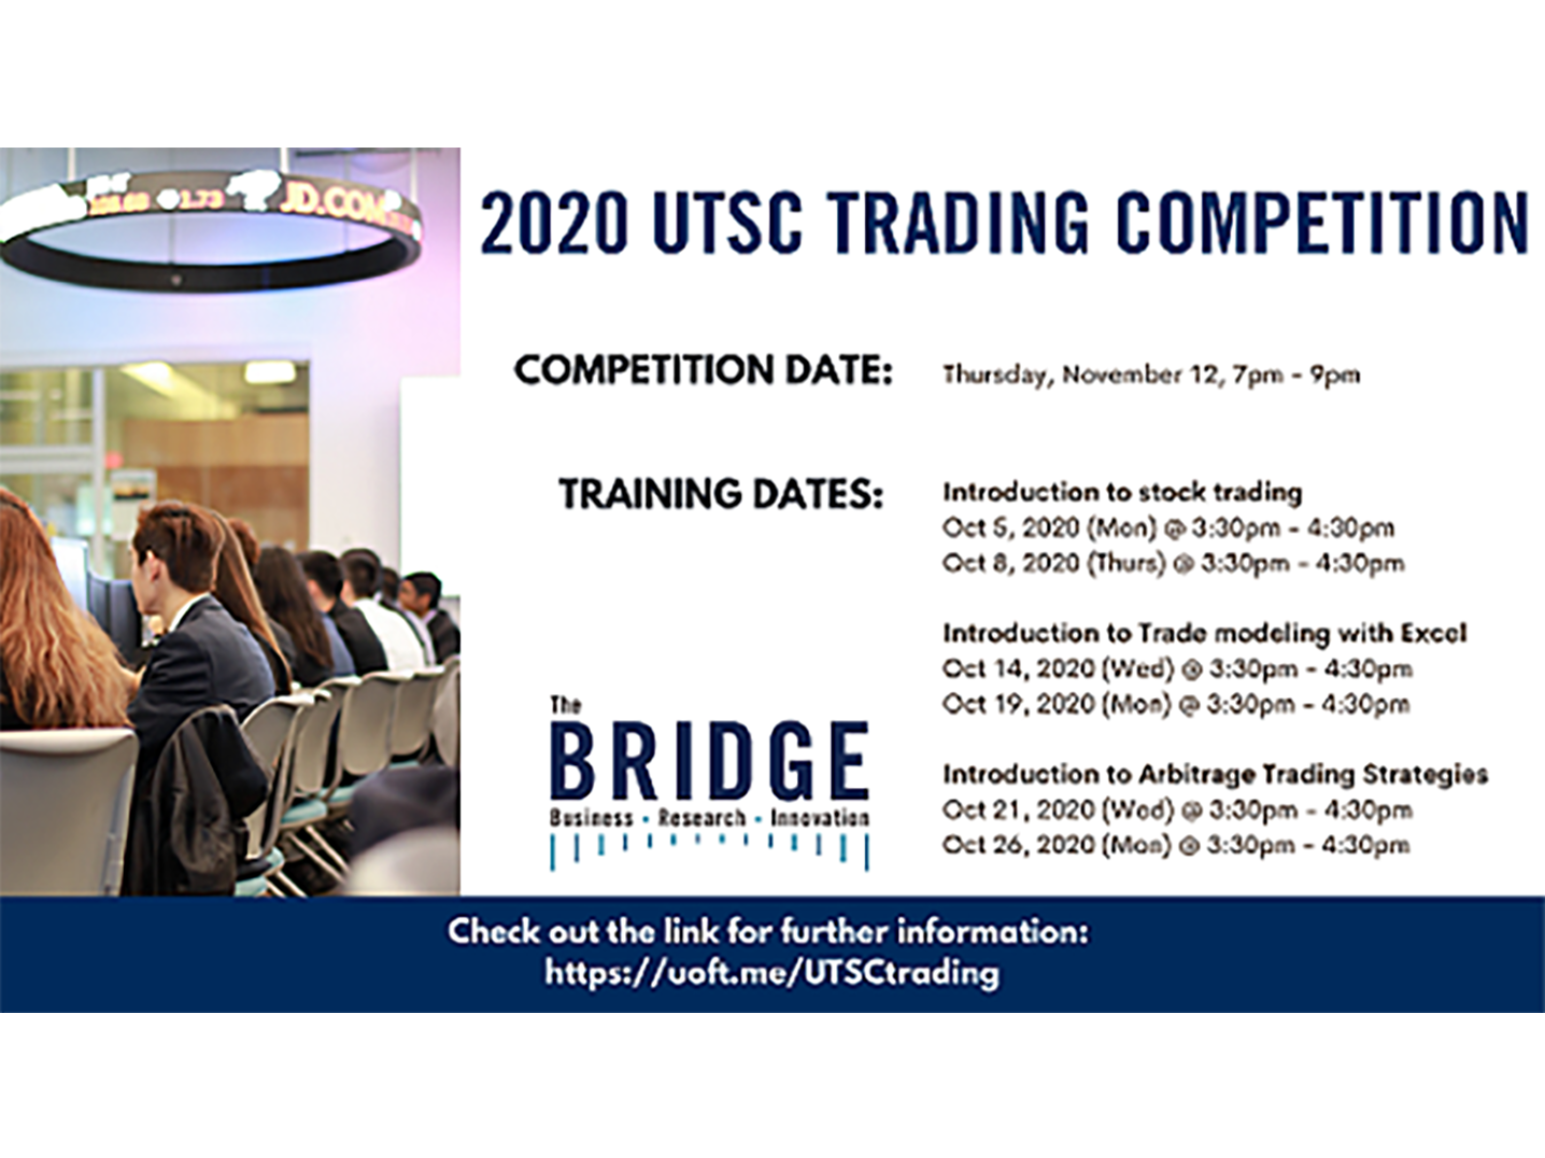 7th Annual UTSC Trading Competition